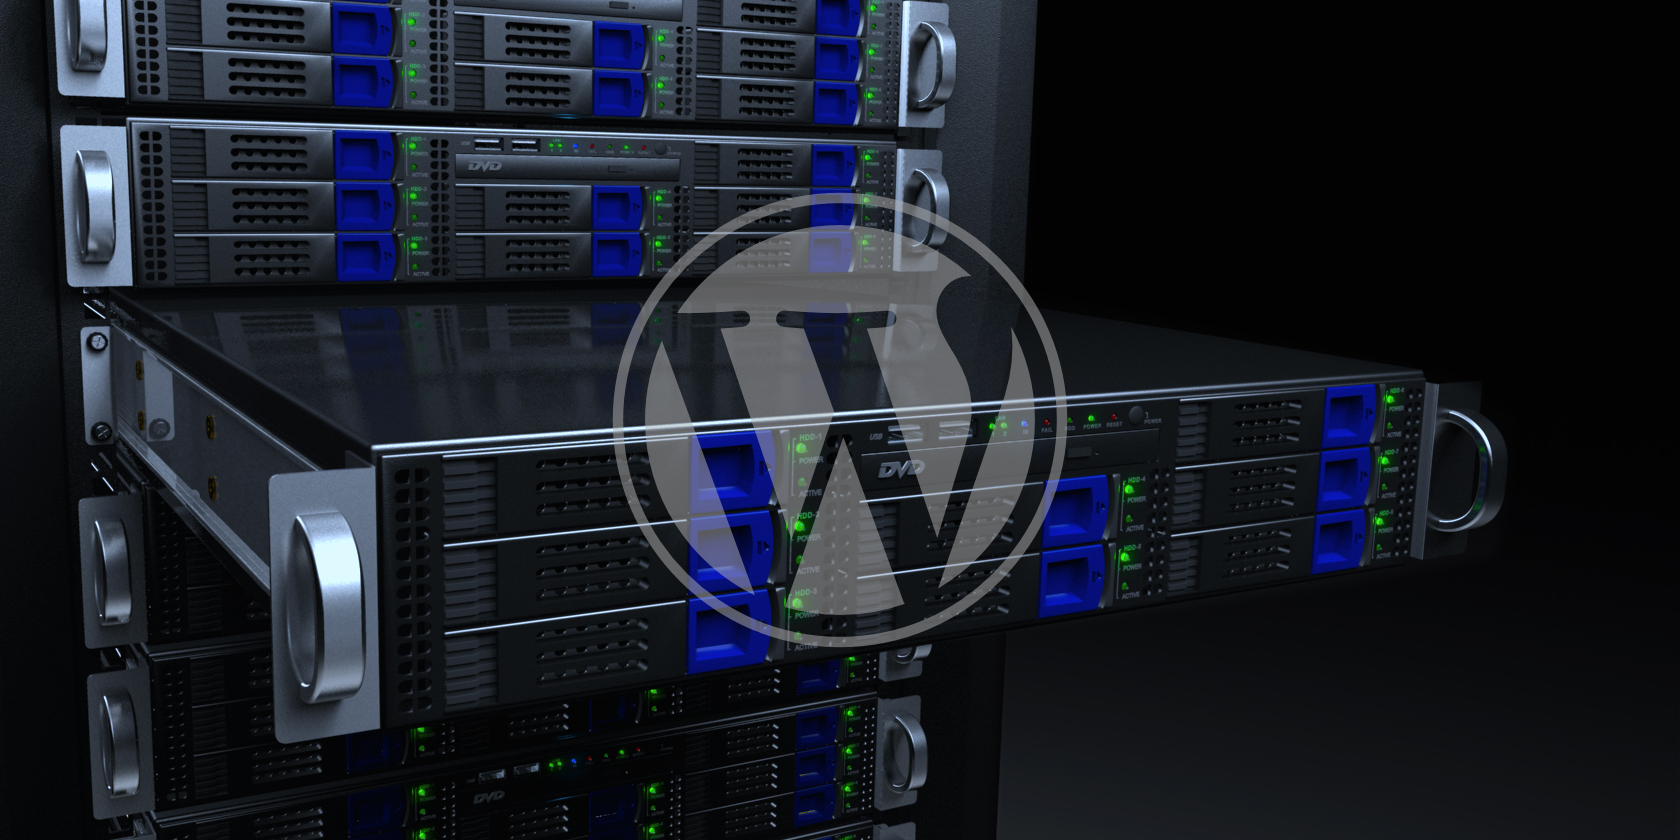 Why You Should Use A VPS Instead Of Shared Hosting For WordPress